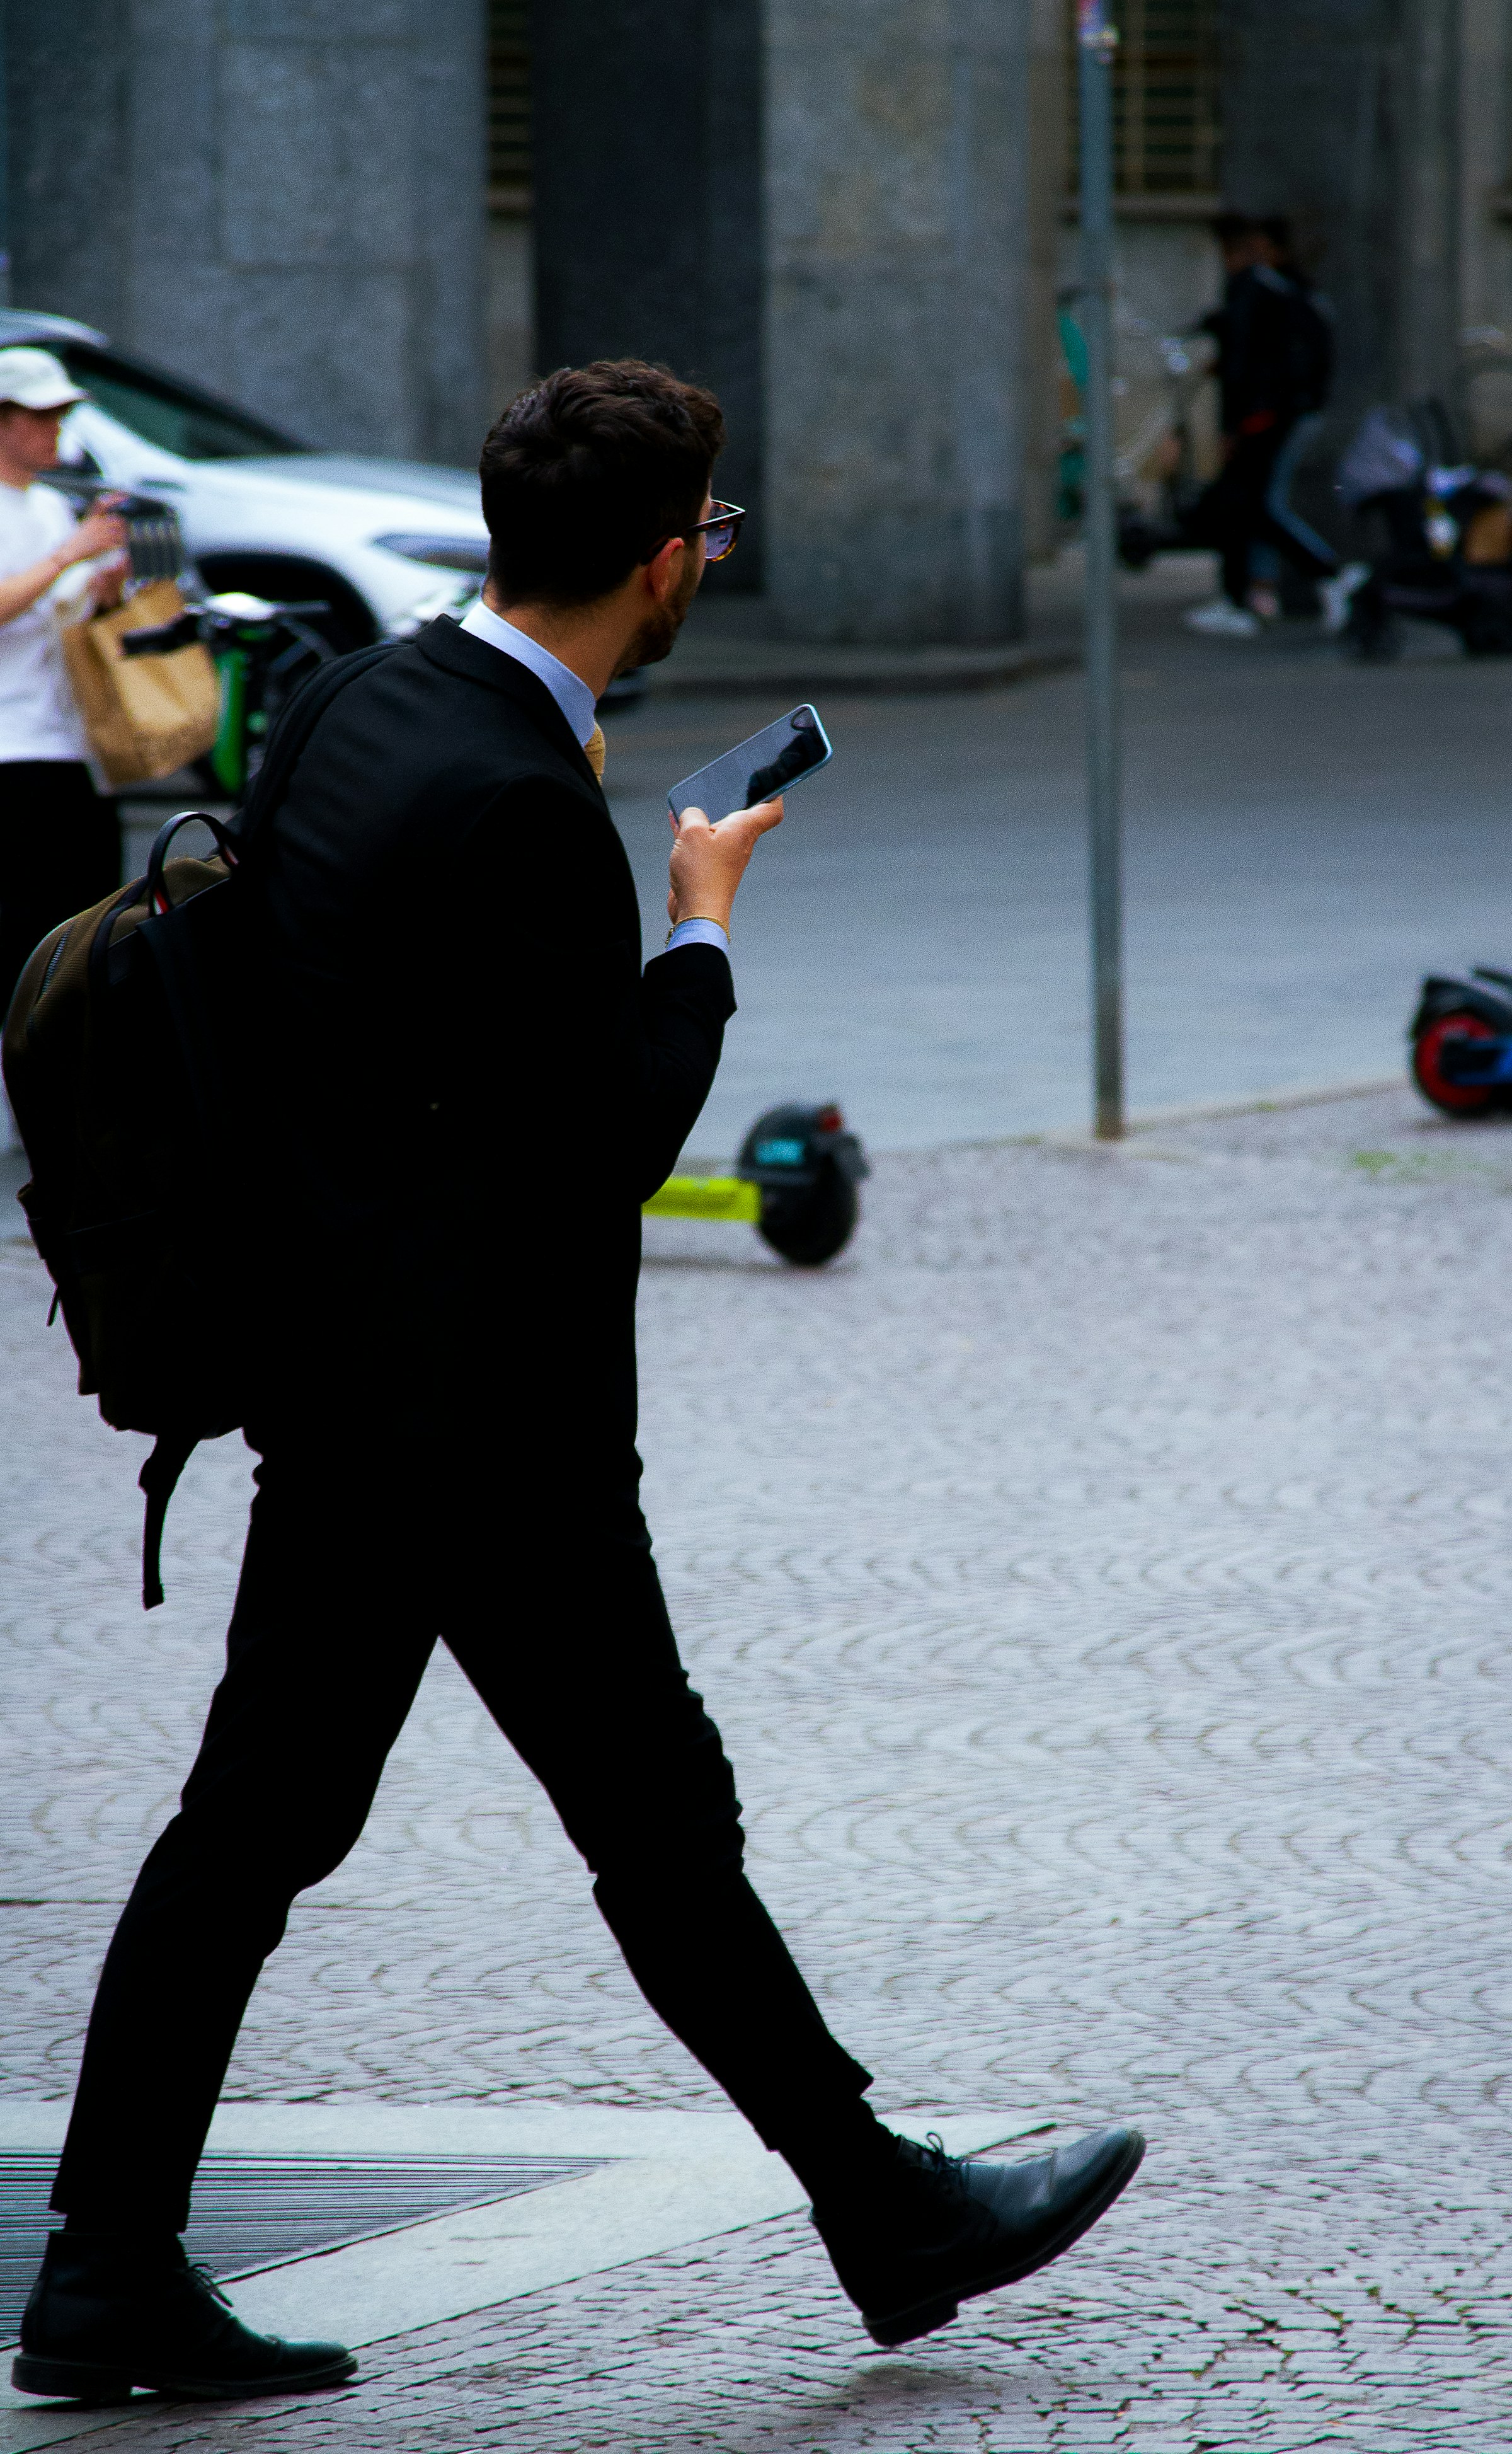 Businessman walking down the street with his phone in his hand | Source: Unsplash